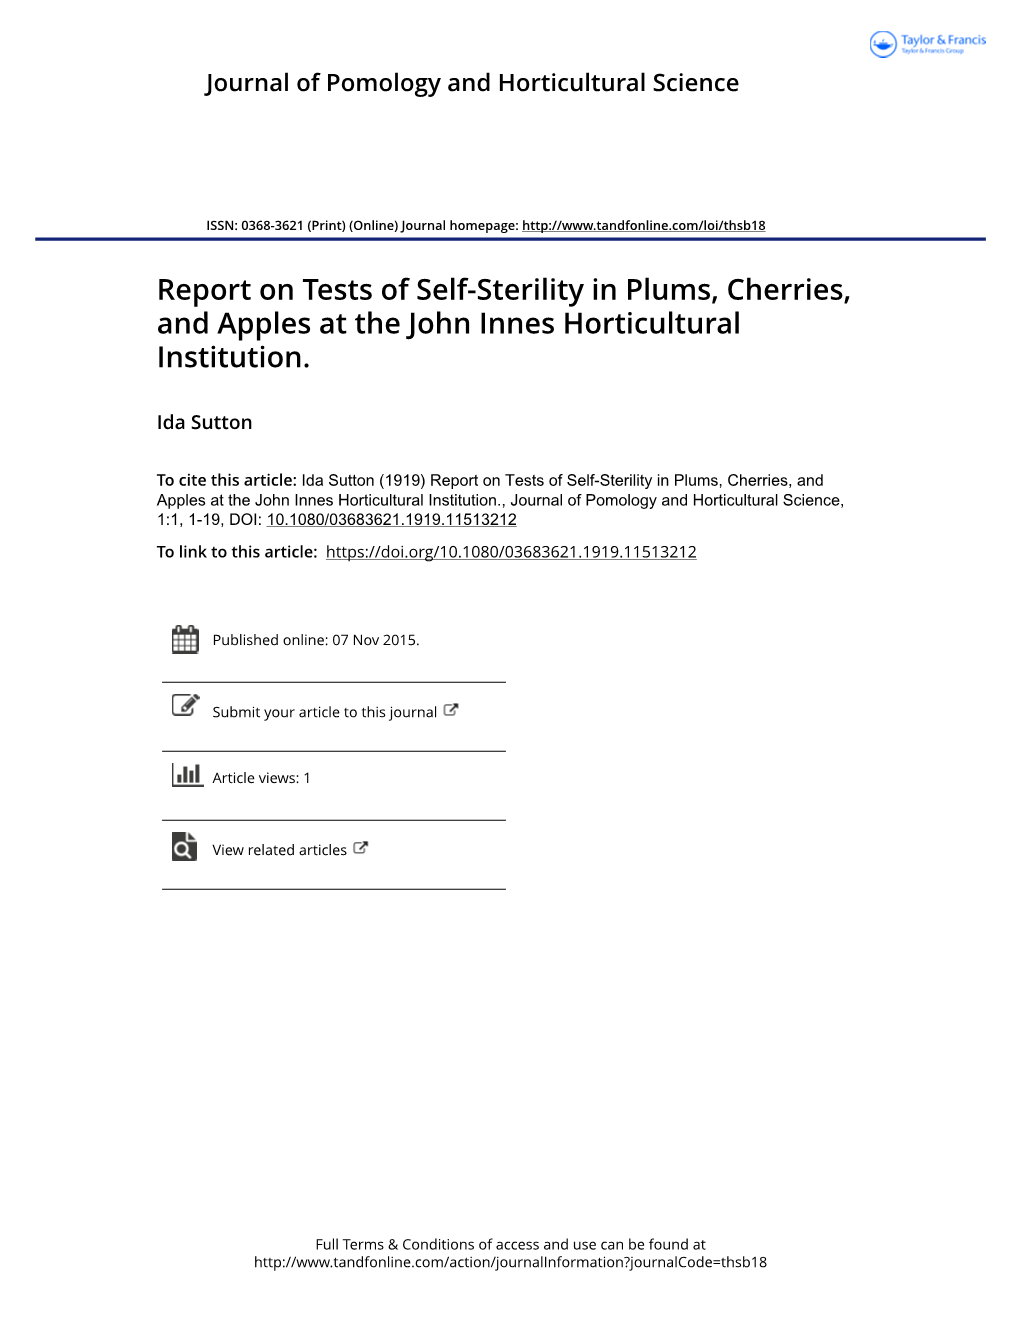 Report on Tests of Self-Sterility in Plums, Cherries, and Apples at the John Innes Horticultural Institution